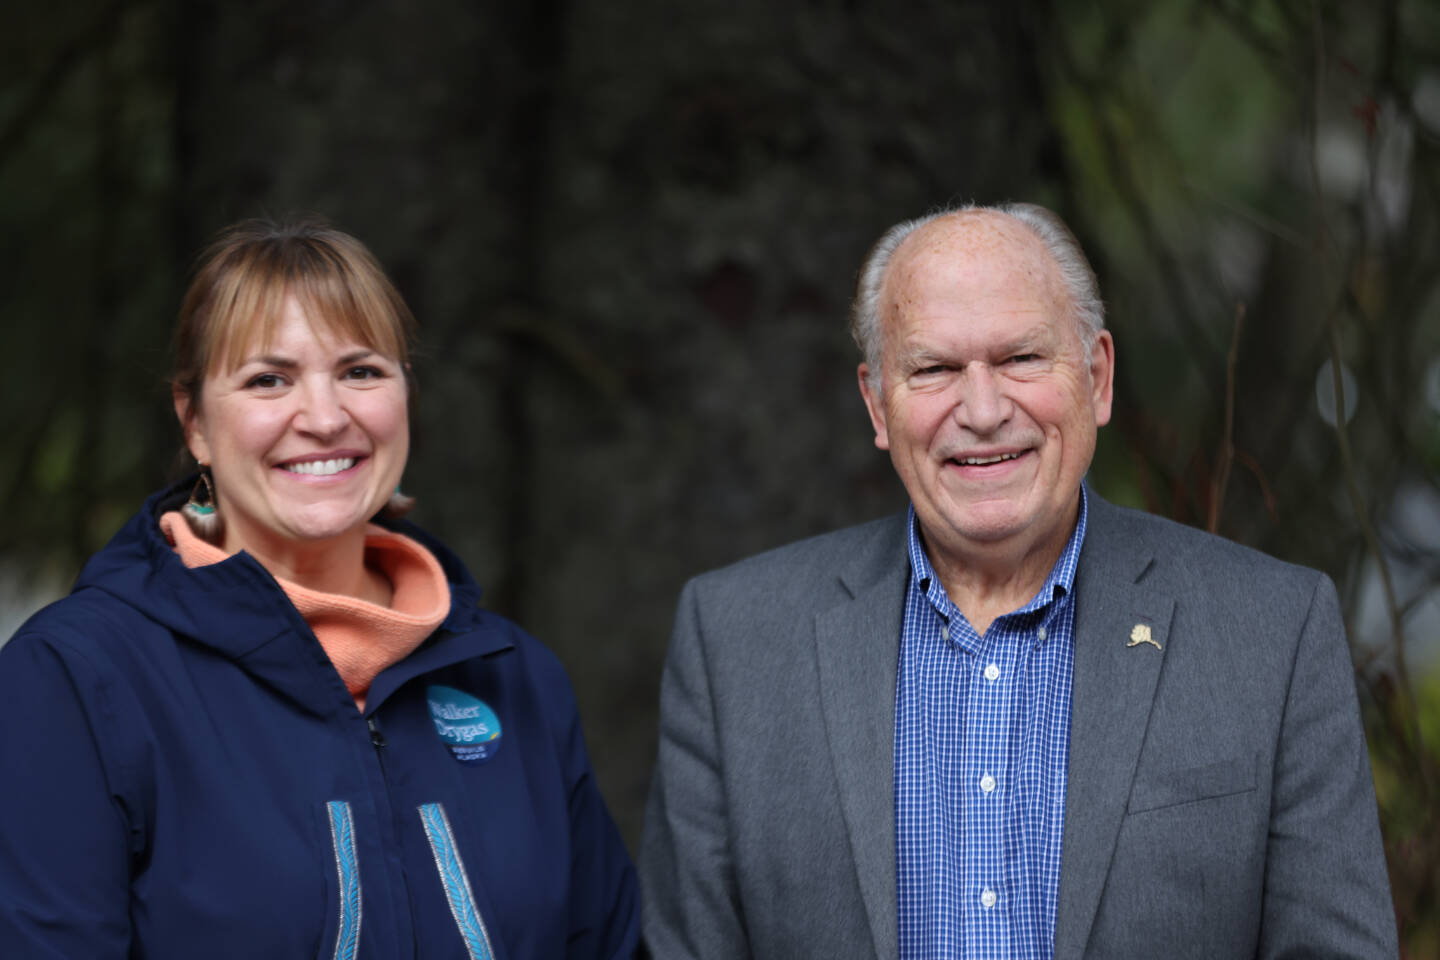 Ben Hohenstatt / Juneau Empire 
Heidi Drygas, who is running for lieutenant governor, and Bill Walker, who is running for governor, smile outside the Juneau Empire’s offices after an interview this week. Walker said he’s hopeful voters will understand his decision to draw from the Alaska Permanent Fund to fund state government.